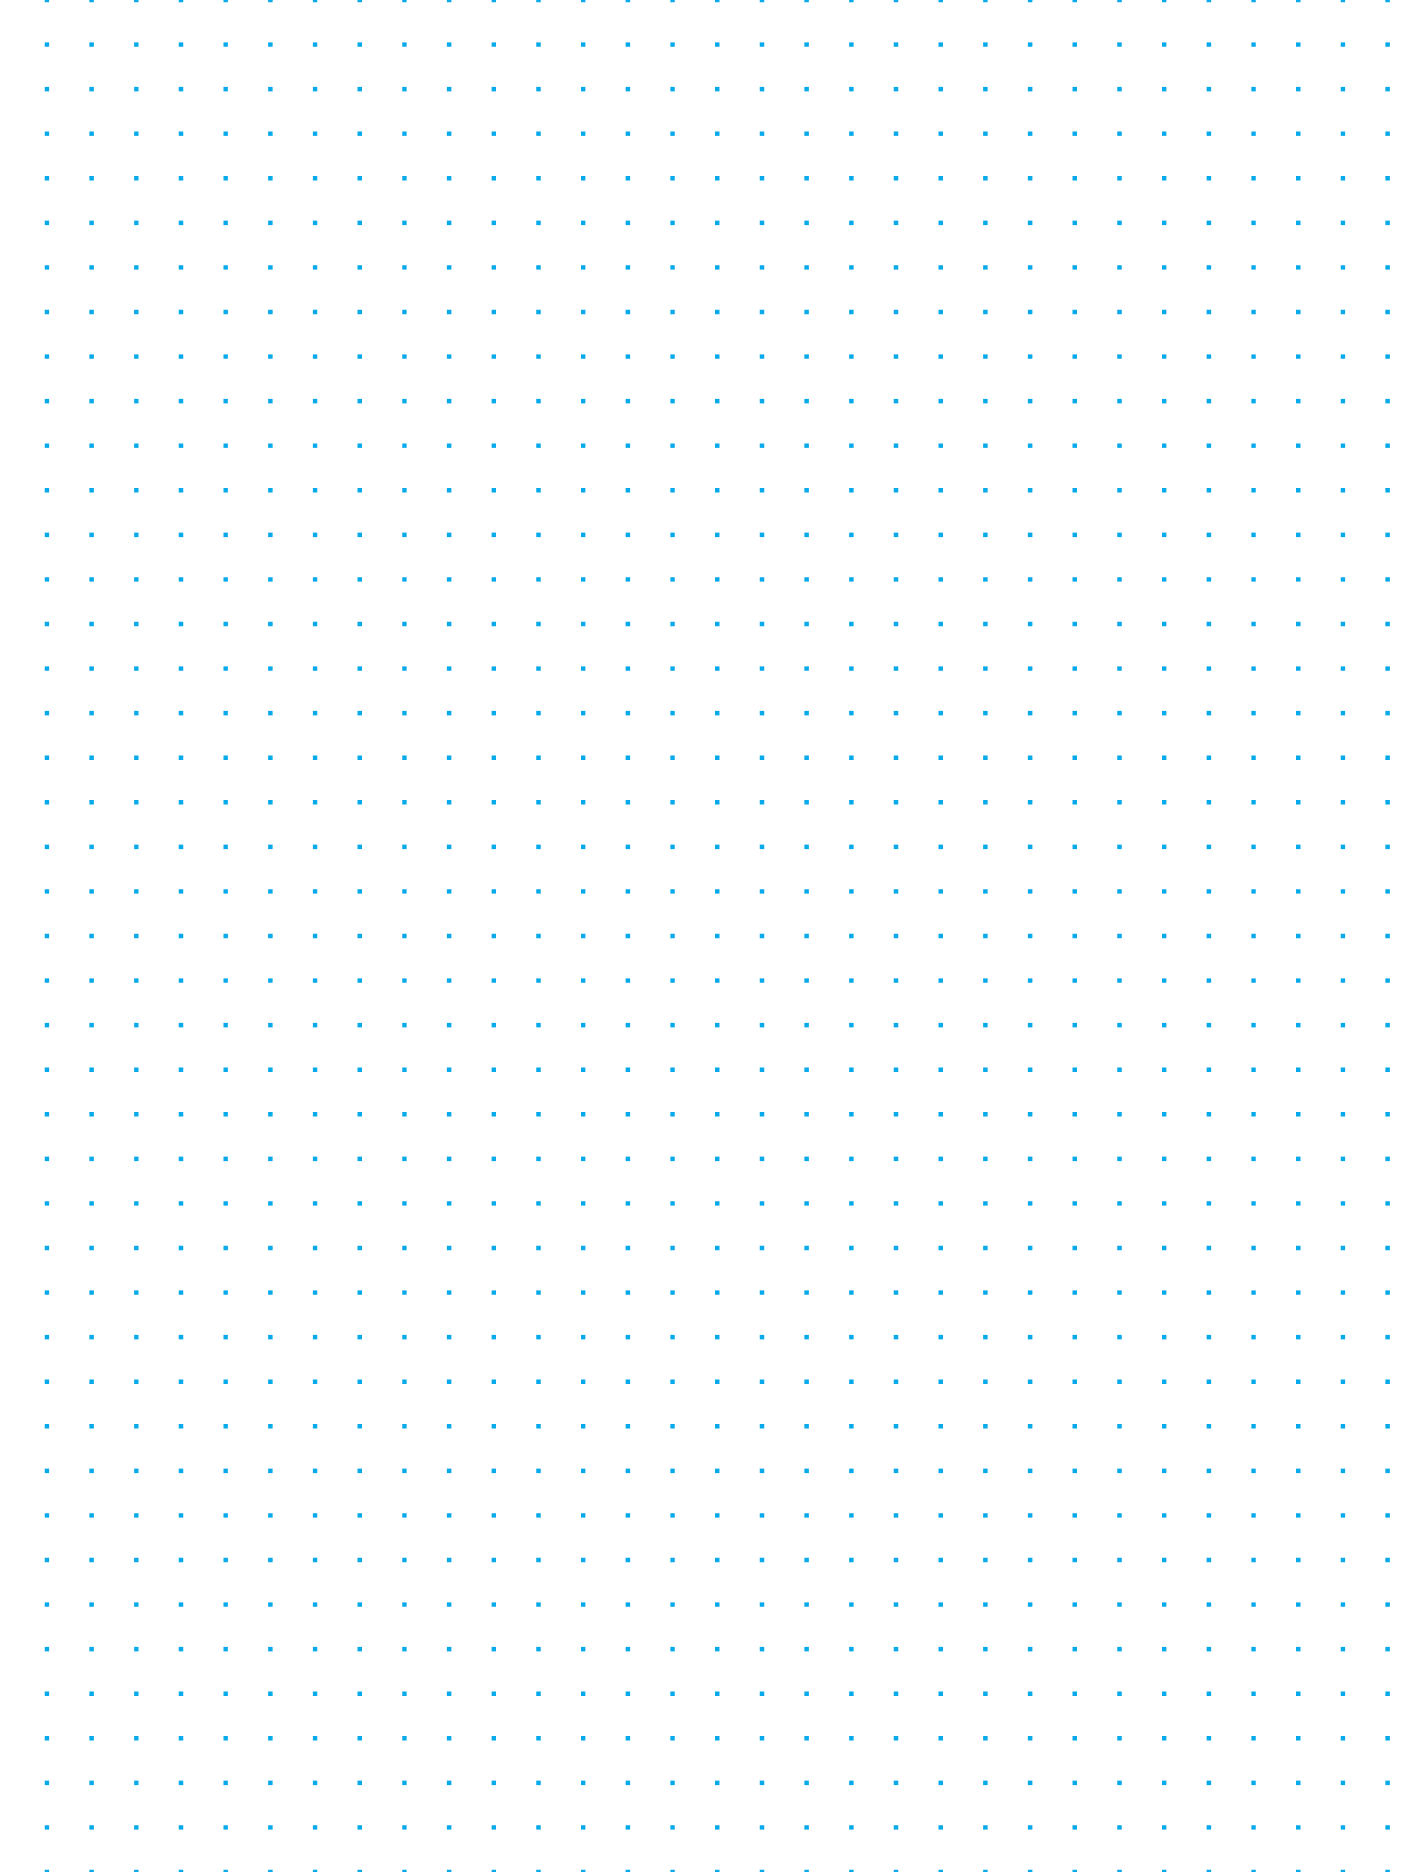 5 mm dotted grid at 227 DPI - 1404x1872.png